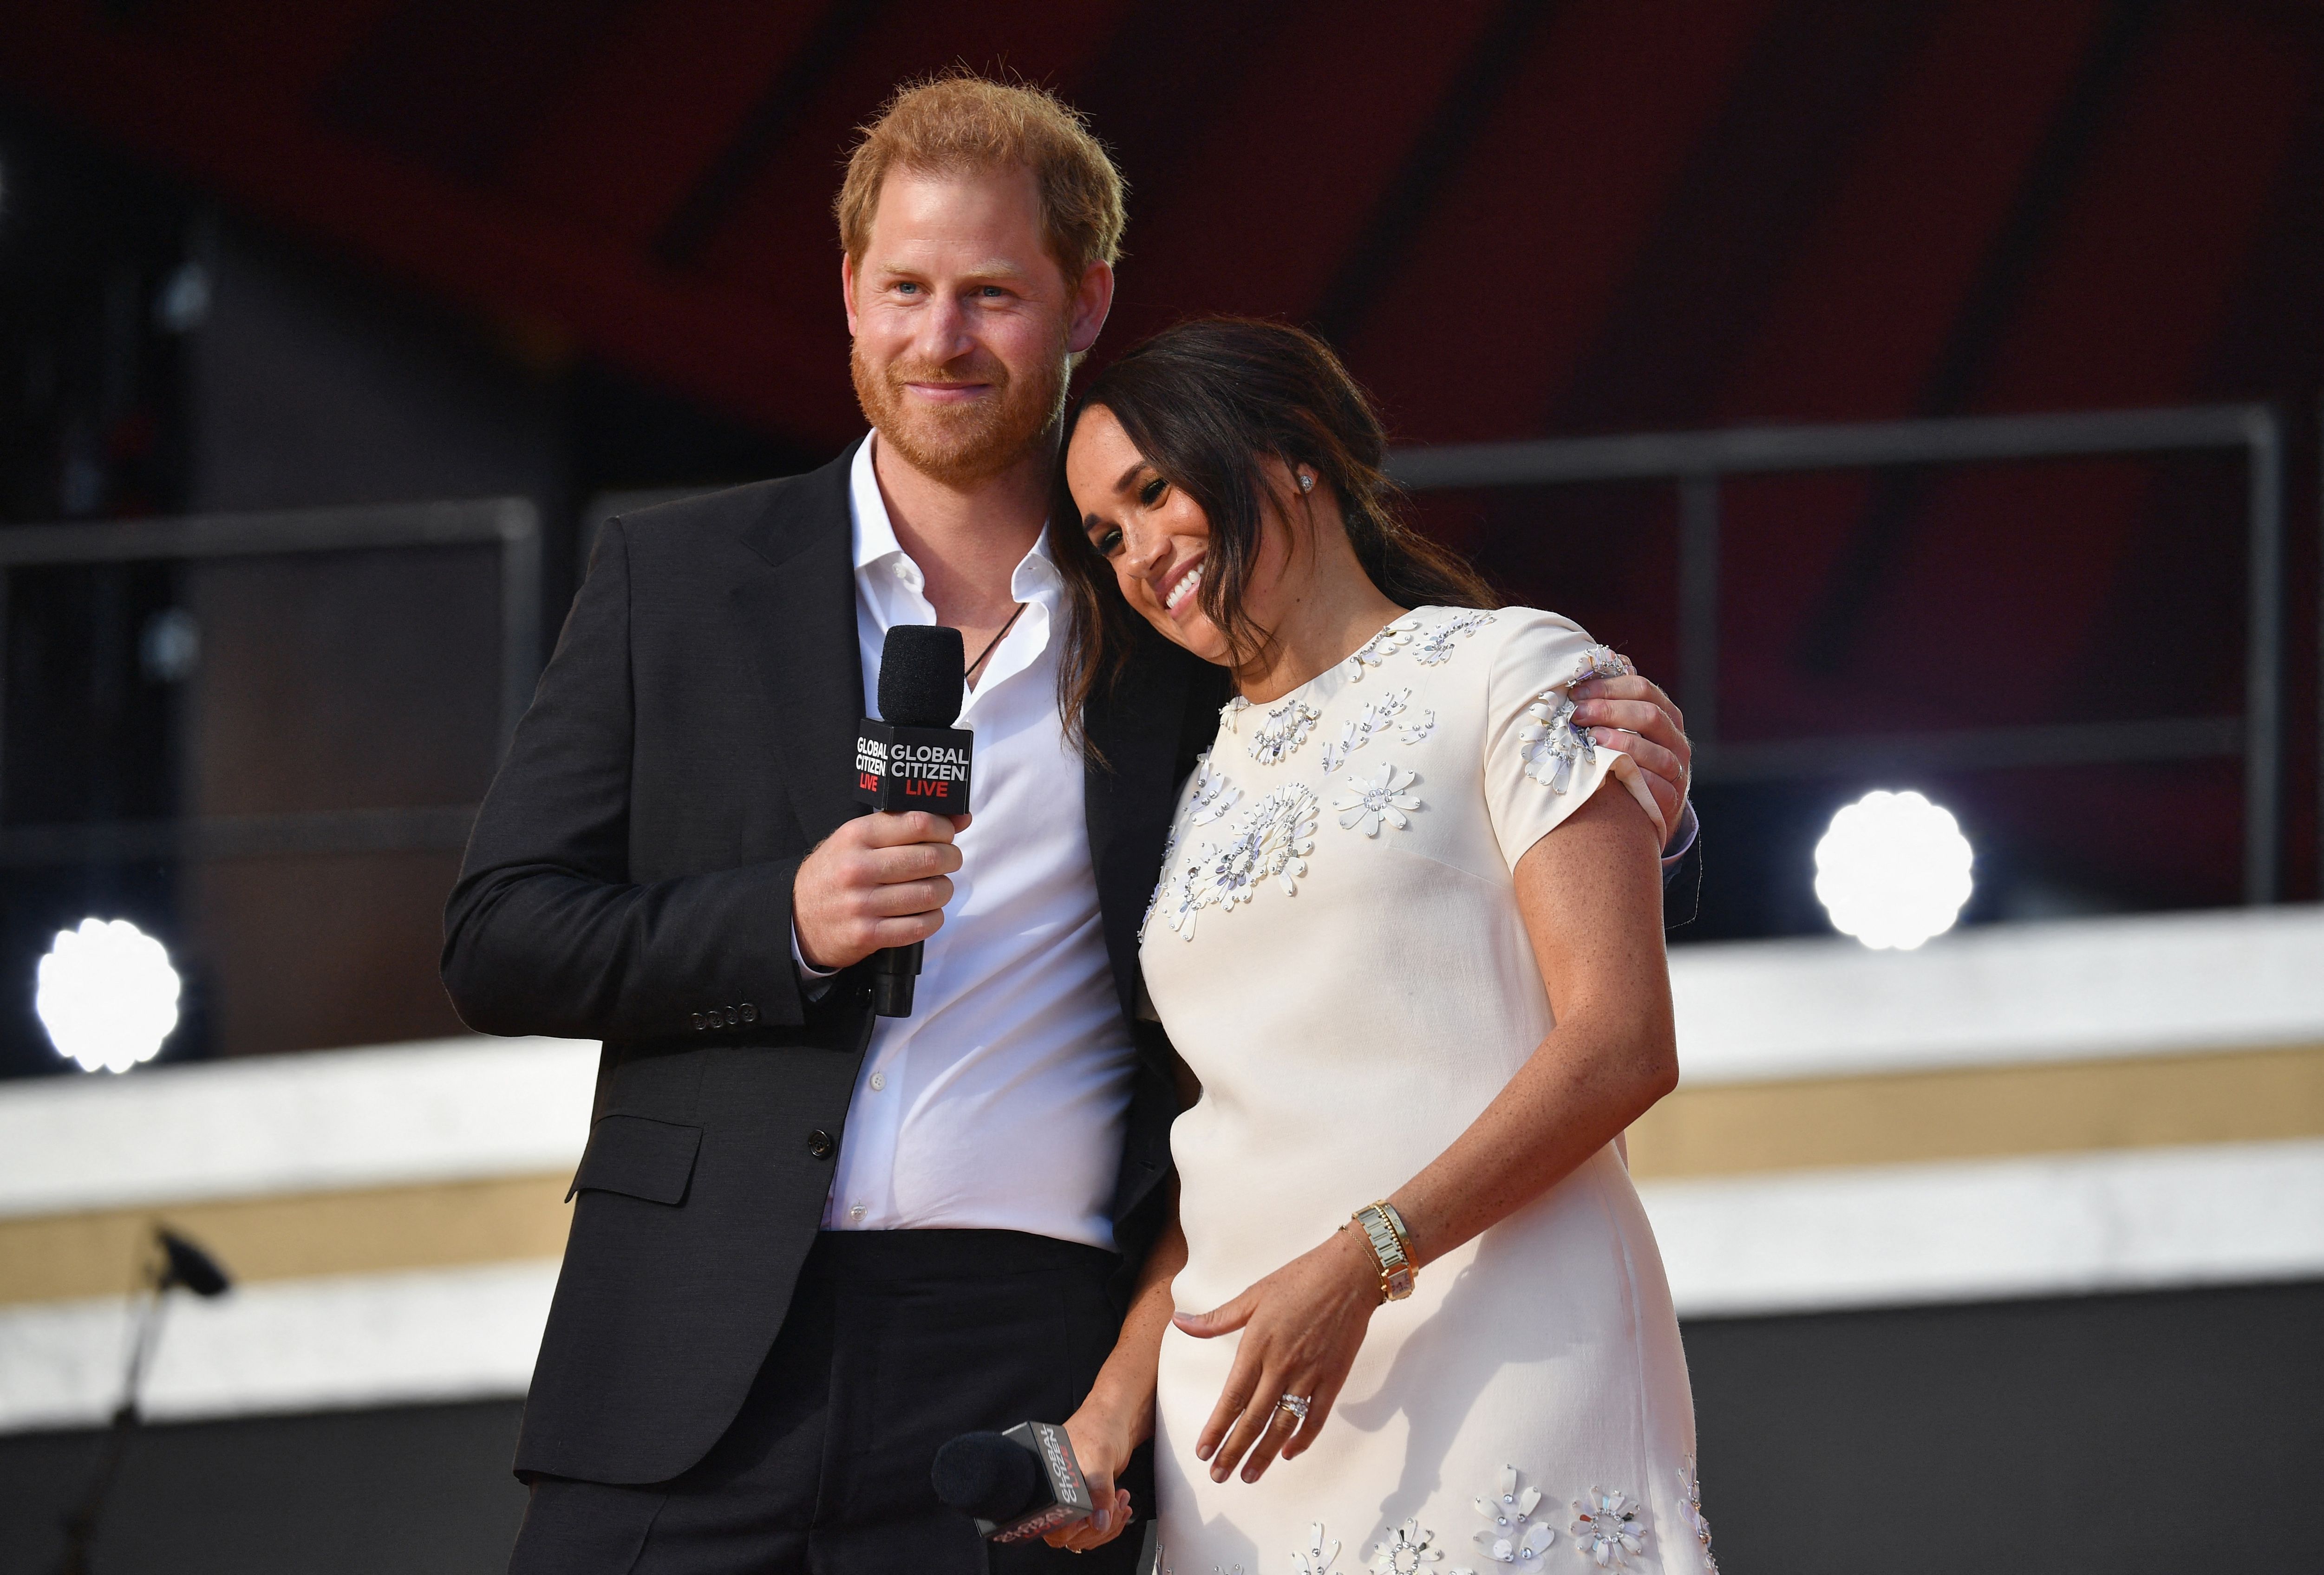 Prince Harry, Duke of Sussex and Meghan Markle, Duchess of Sussex speak during the Global Citizen Live festival in New York City, on September 25, 2021. | Source: Getty Images